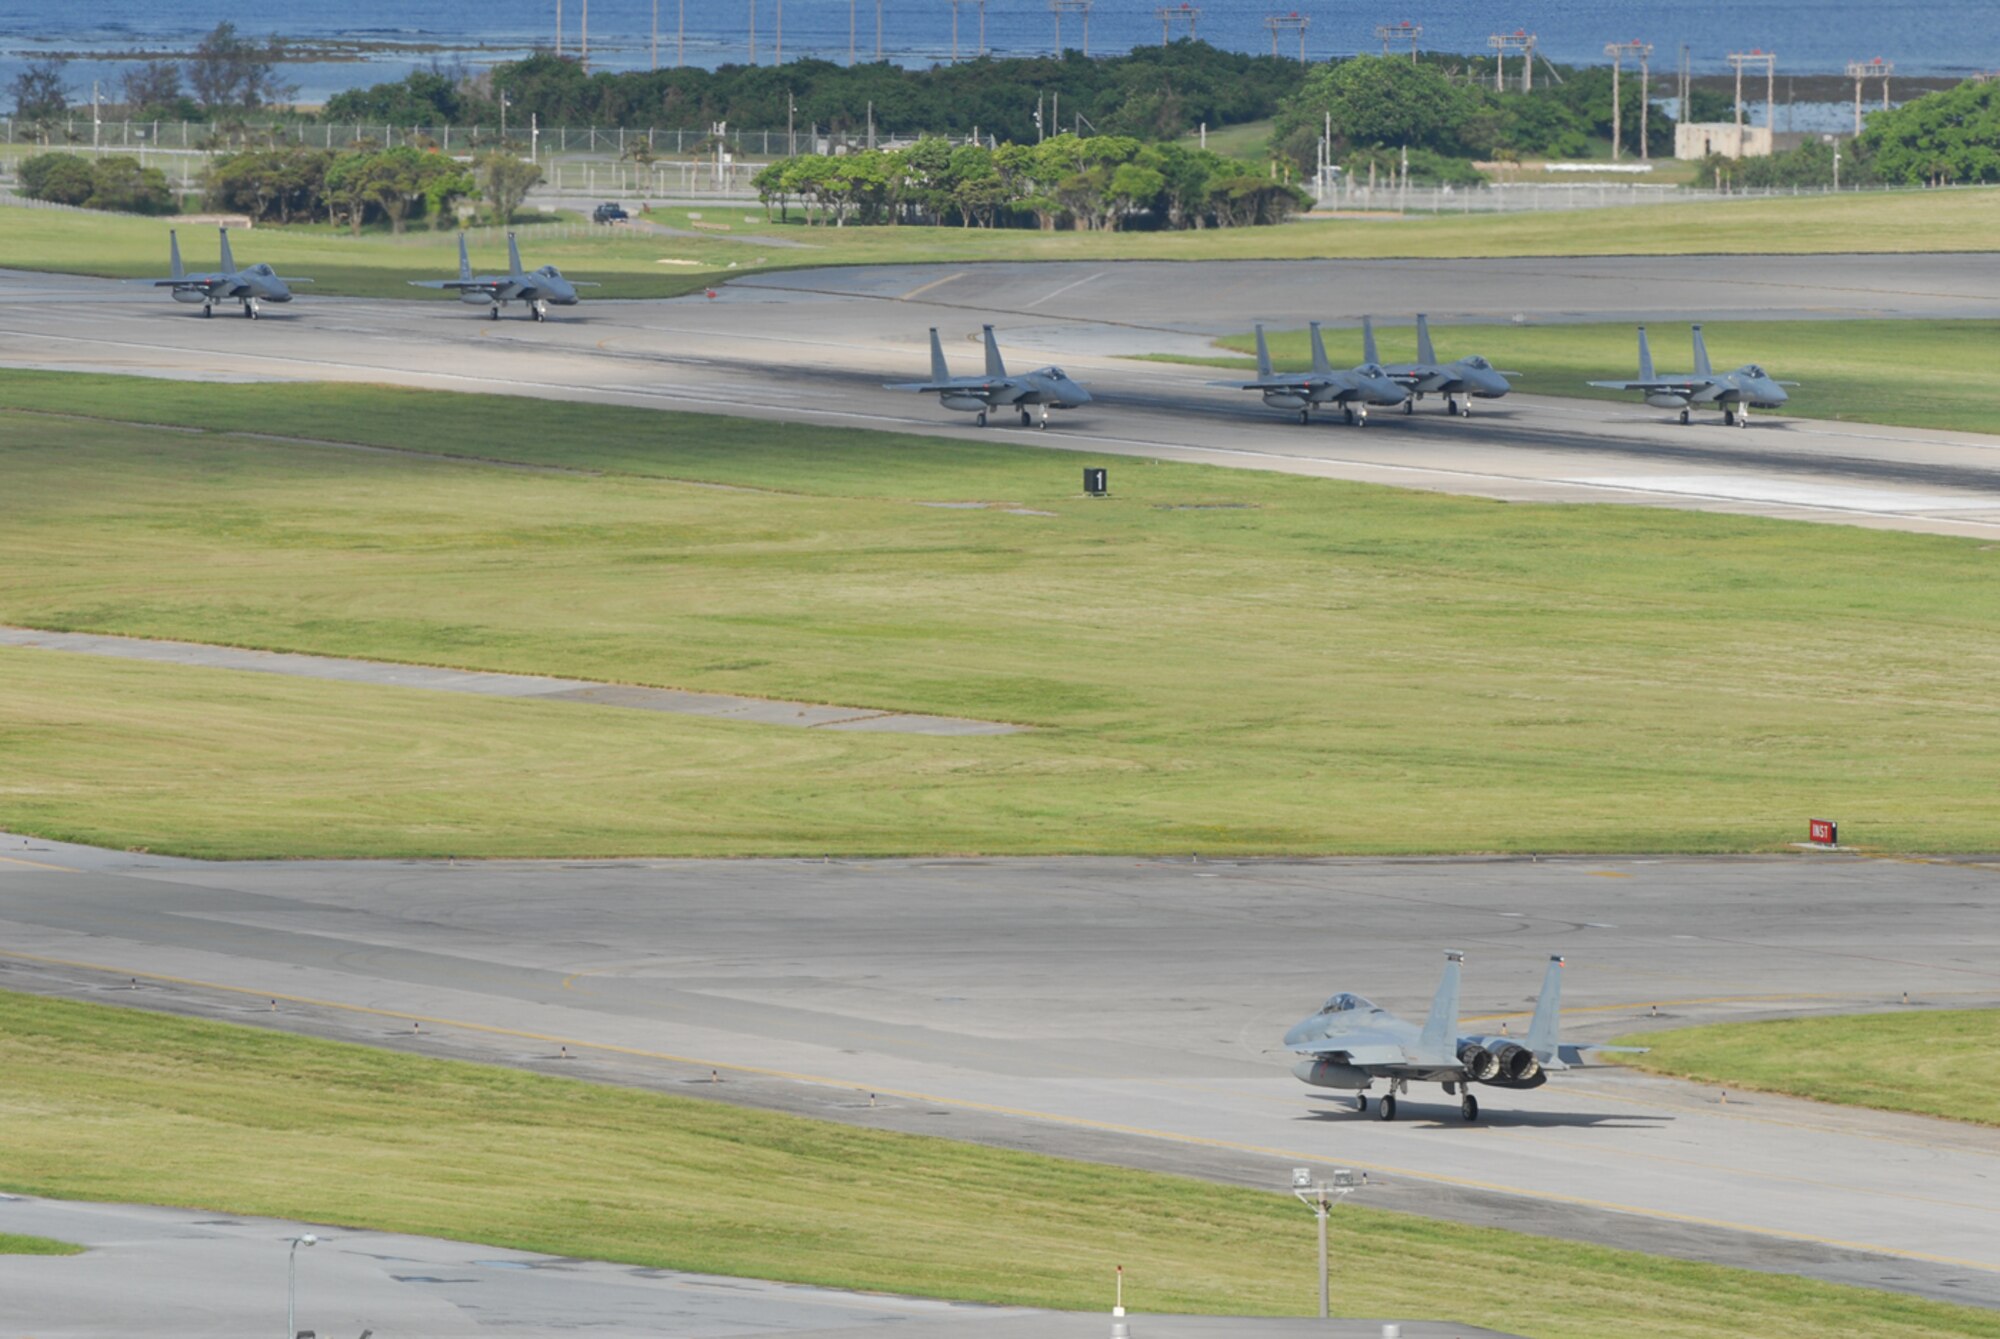 Six 18th Wing F-15C Eagles prepare to take off while a seventh taxis into position at Kadena Air Base, Japan, Aug. 5, 2007, en route to Guam in support of Exercise Valiant Shield.  More than 400 Airmen and F-15Cs, KC-135R Stratotankers and E-3 Airborne Warning and Control System aircraft are participating in the weeklong Pacific Command joint exercise which focuses on integrated joint training to enable real-world proficiency in sustaining forces and detecting, locating, tracking and engaging units at sea, in the air, on land, and cyberspace in response to a range of mission areas. U.S. Air Force photo/Senior Airman Darnell T. Cannady